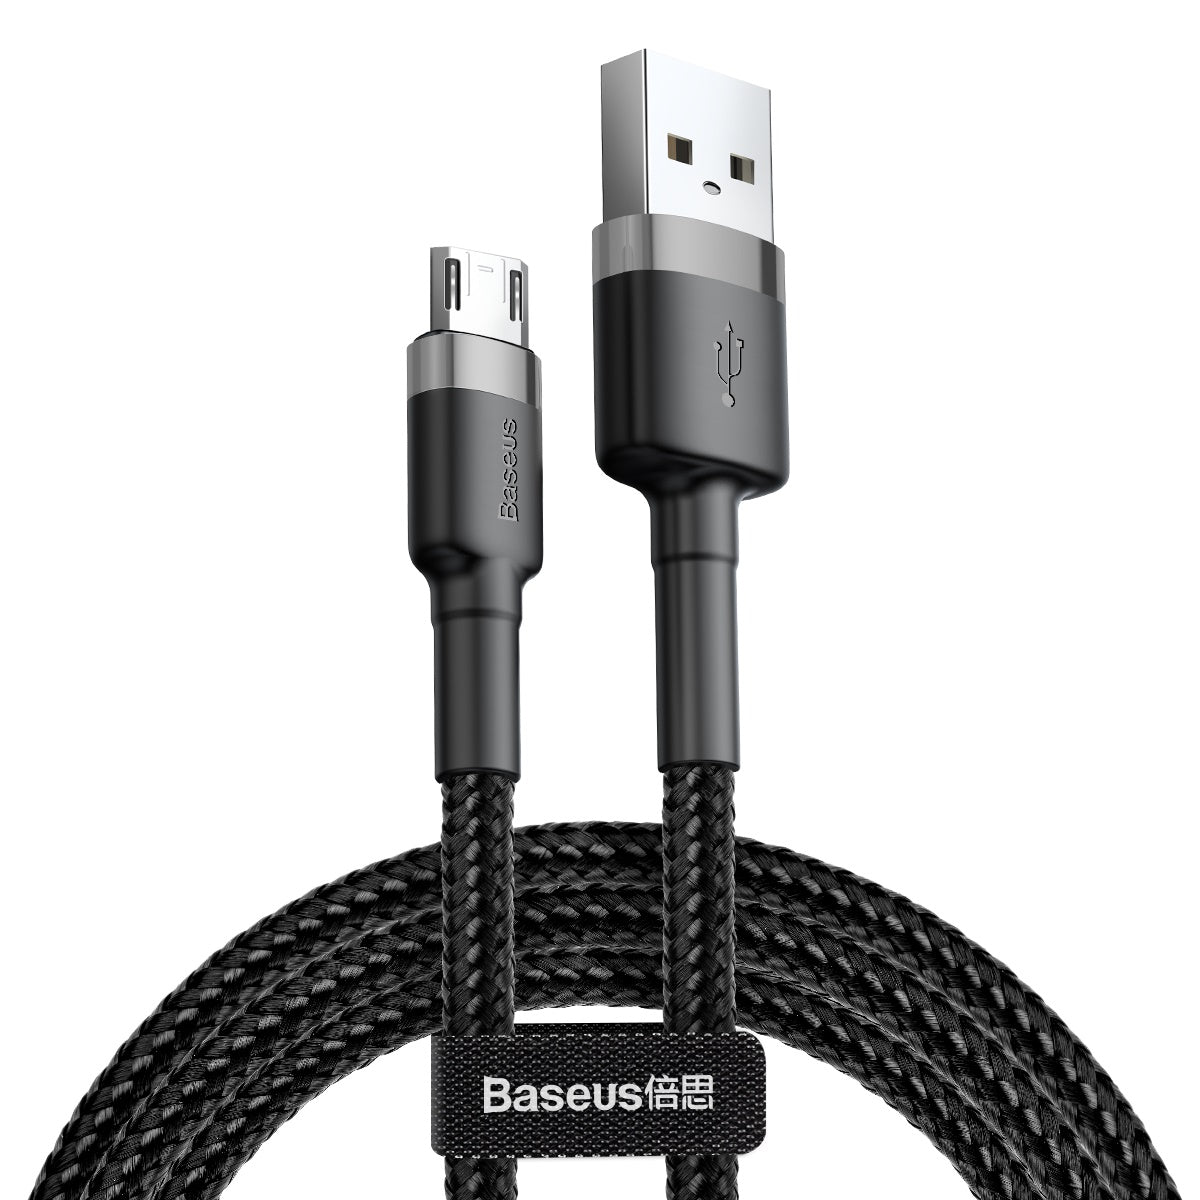 BASEUS 0.5M Micro USB Cable (2.4A) | Cafule Series Fast Charging Cable